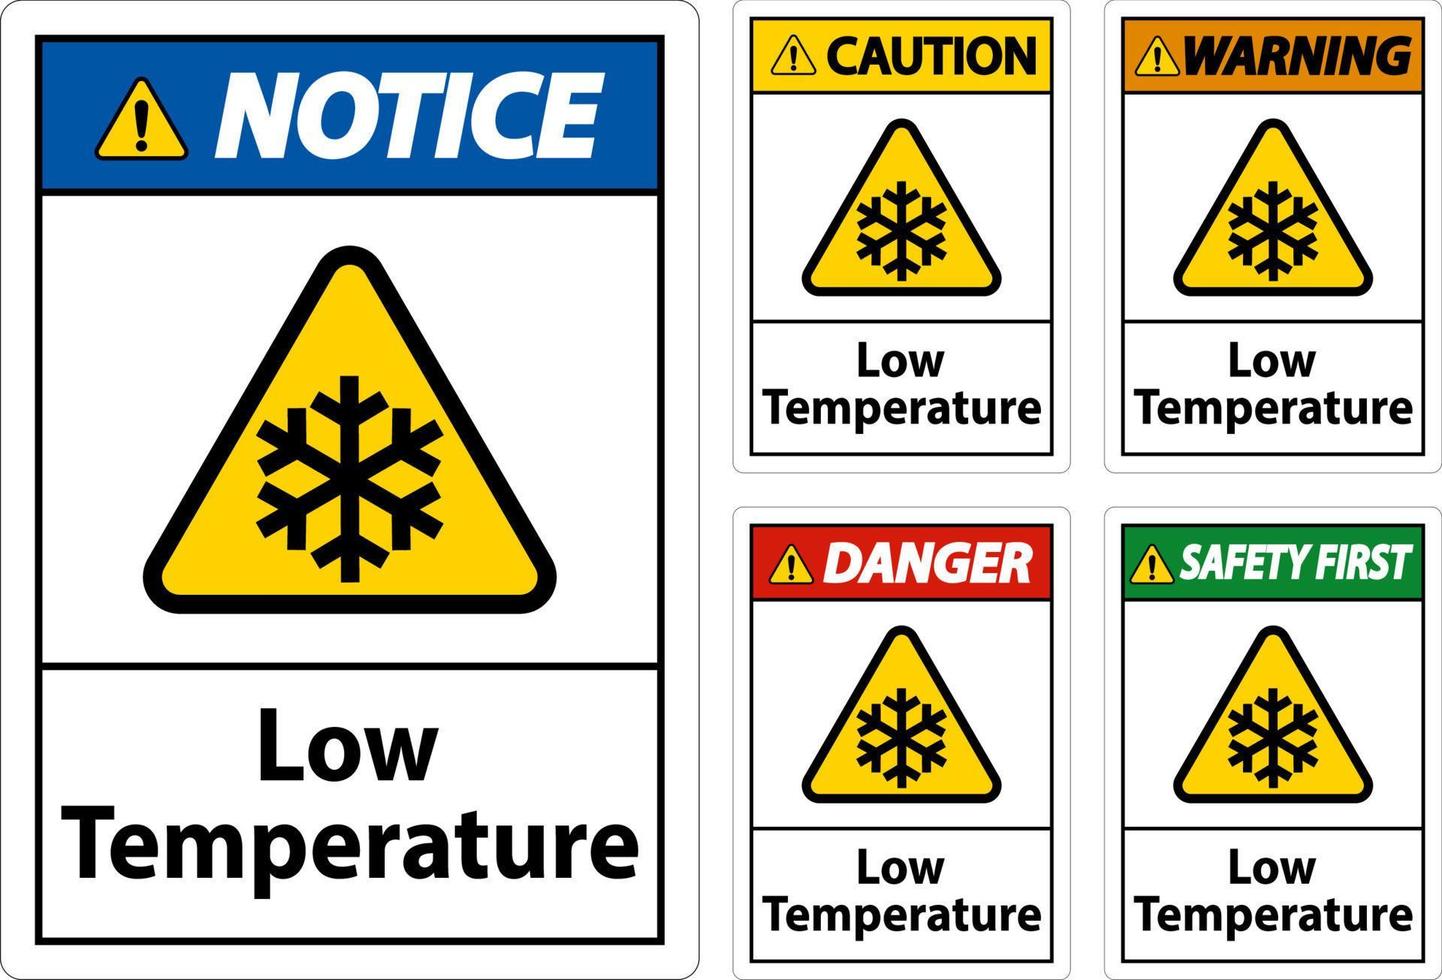 Caution Low temperature symbol and text safety sign. vector